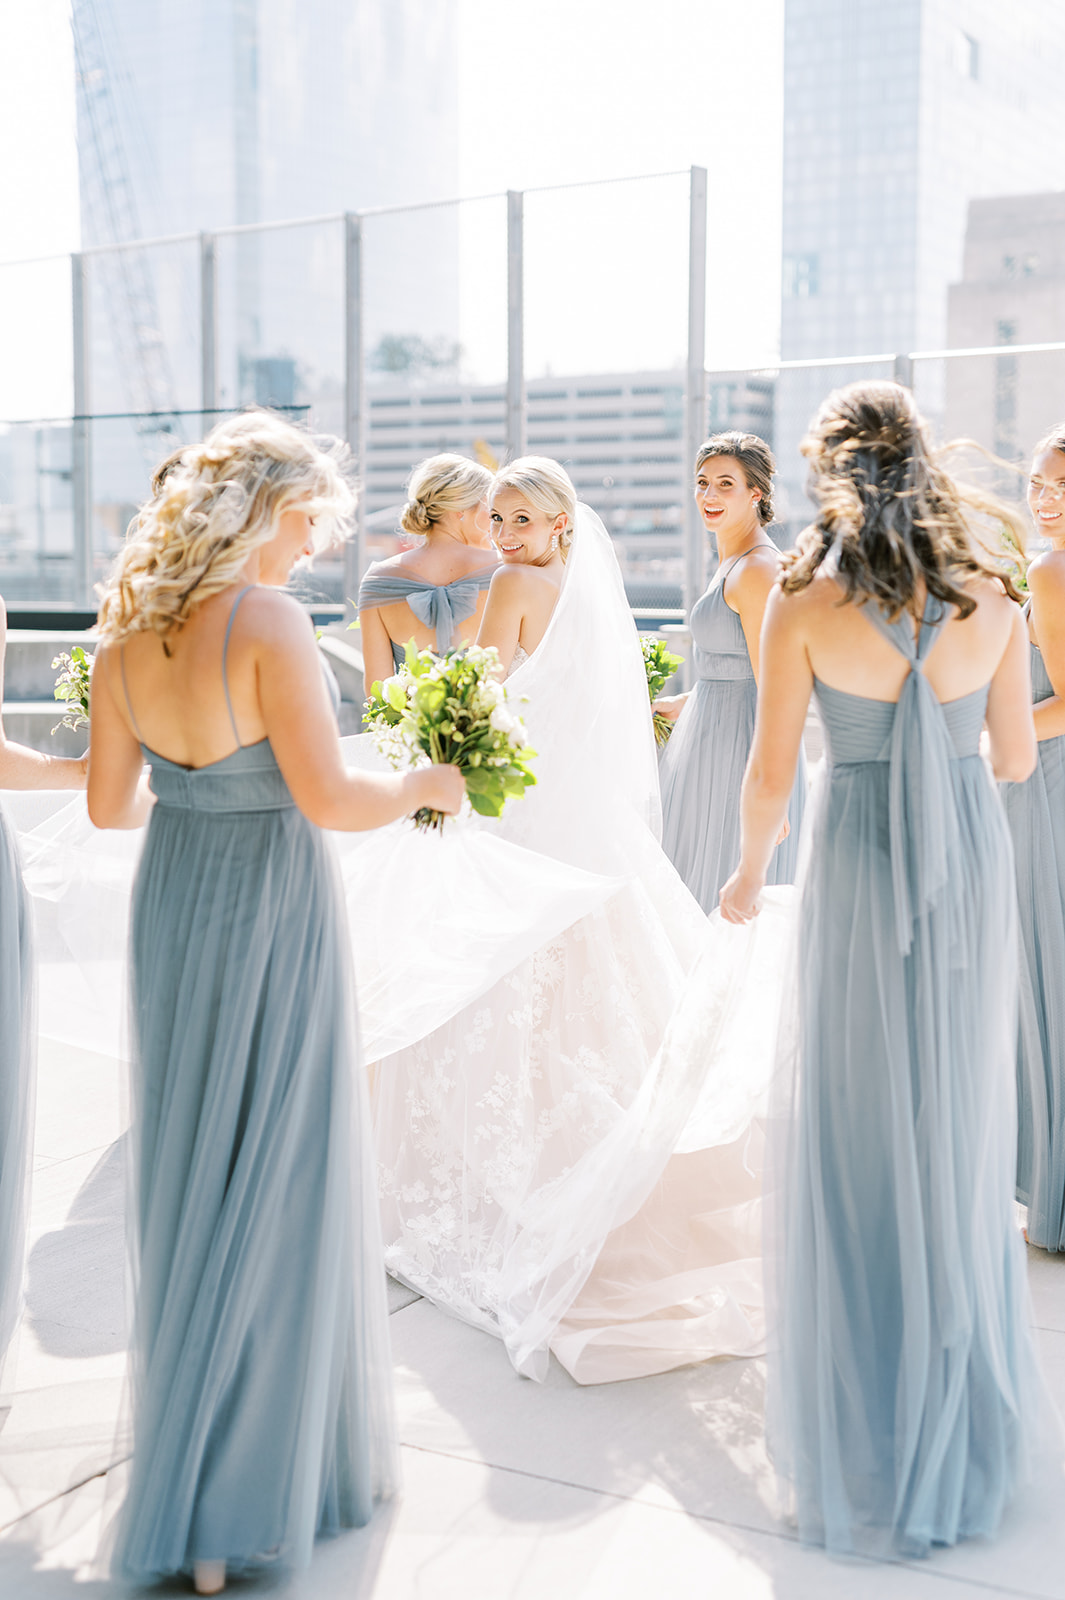 sunny bride walking with bridesmaids in pale blue for Secret Urban Garden Wedding at Philadelphia’s Fitler Club